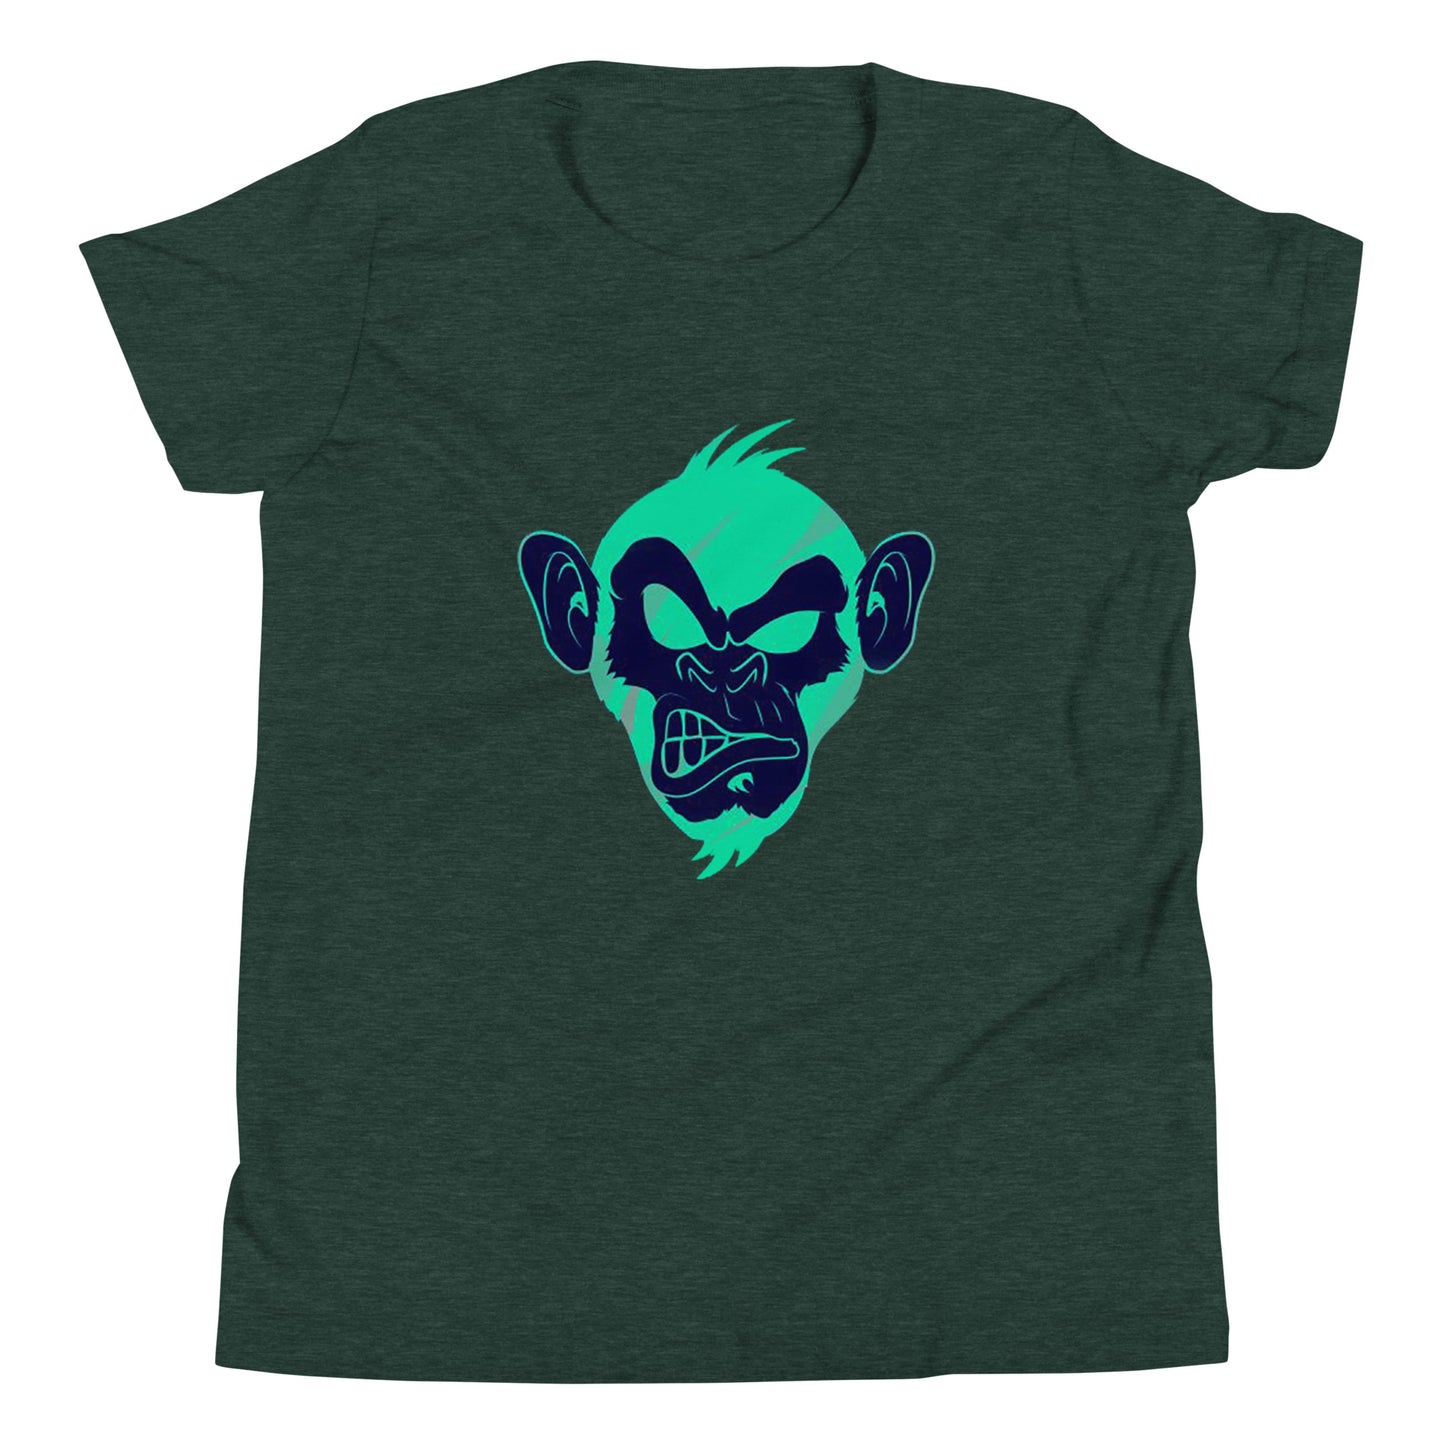 Green forest T-shirt with print of a Cool monkey in black light green